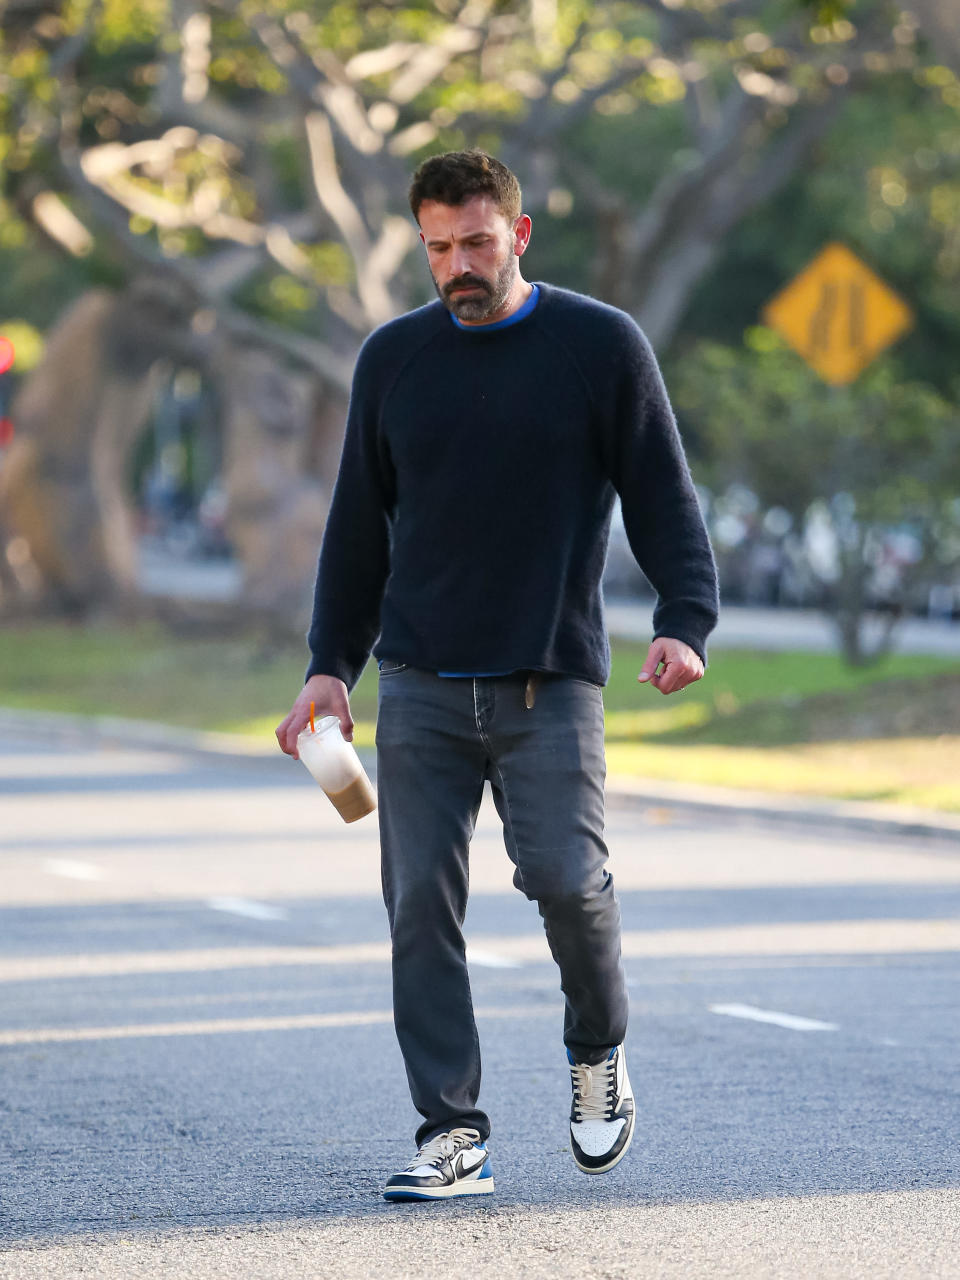 he's looking down while he walks and holds an almost empty iced coffee